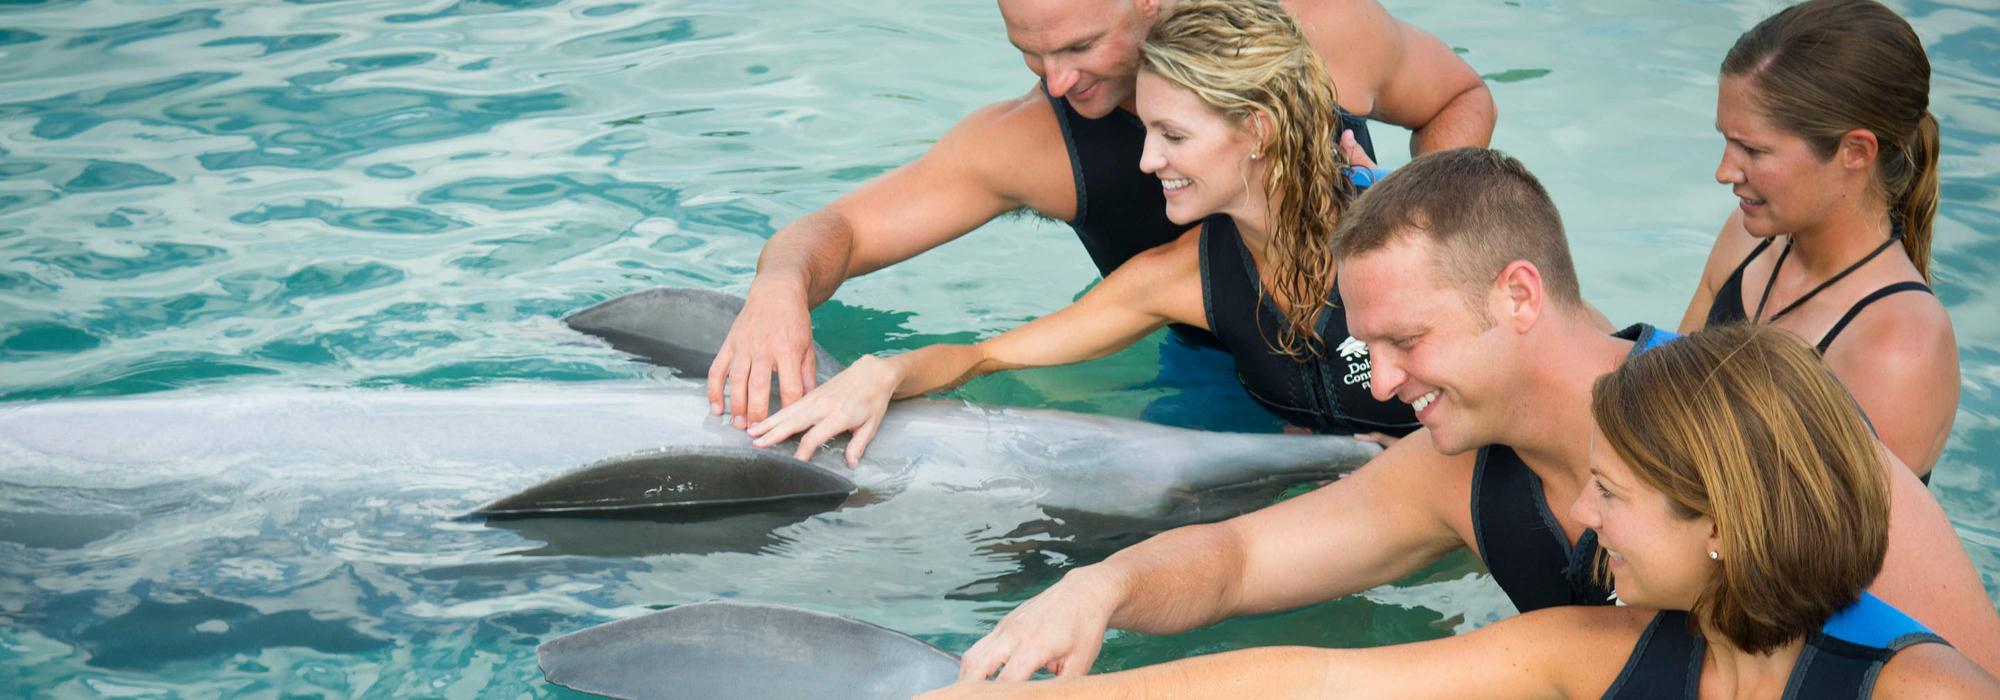 The Dolphin Connection at Hawks Cay Resort